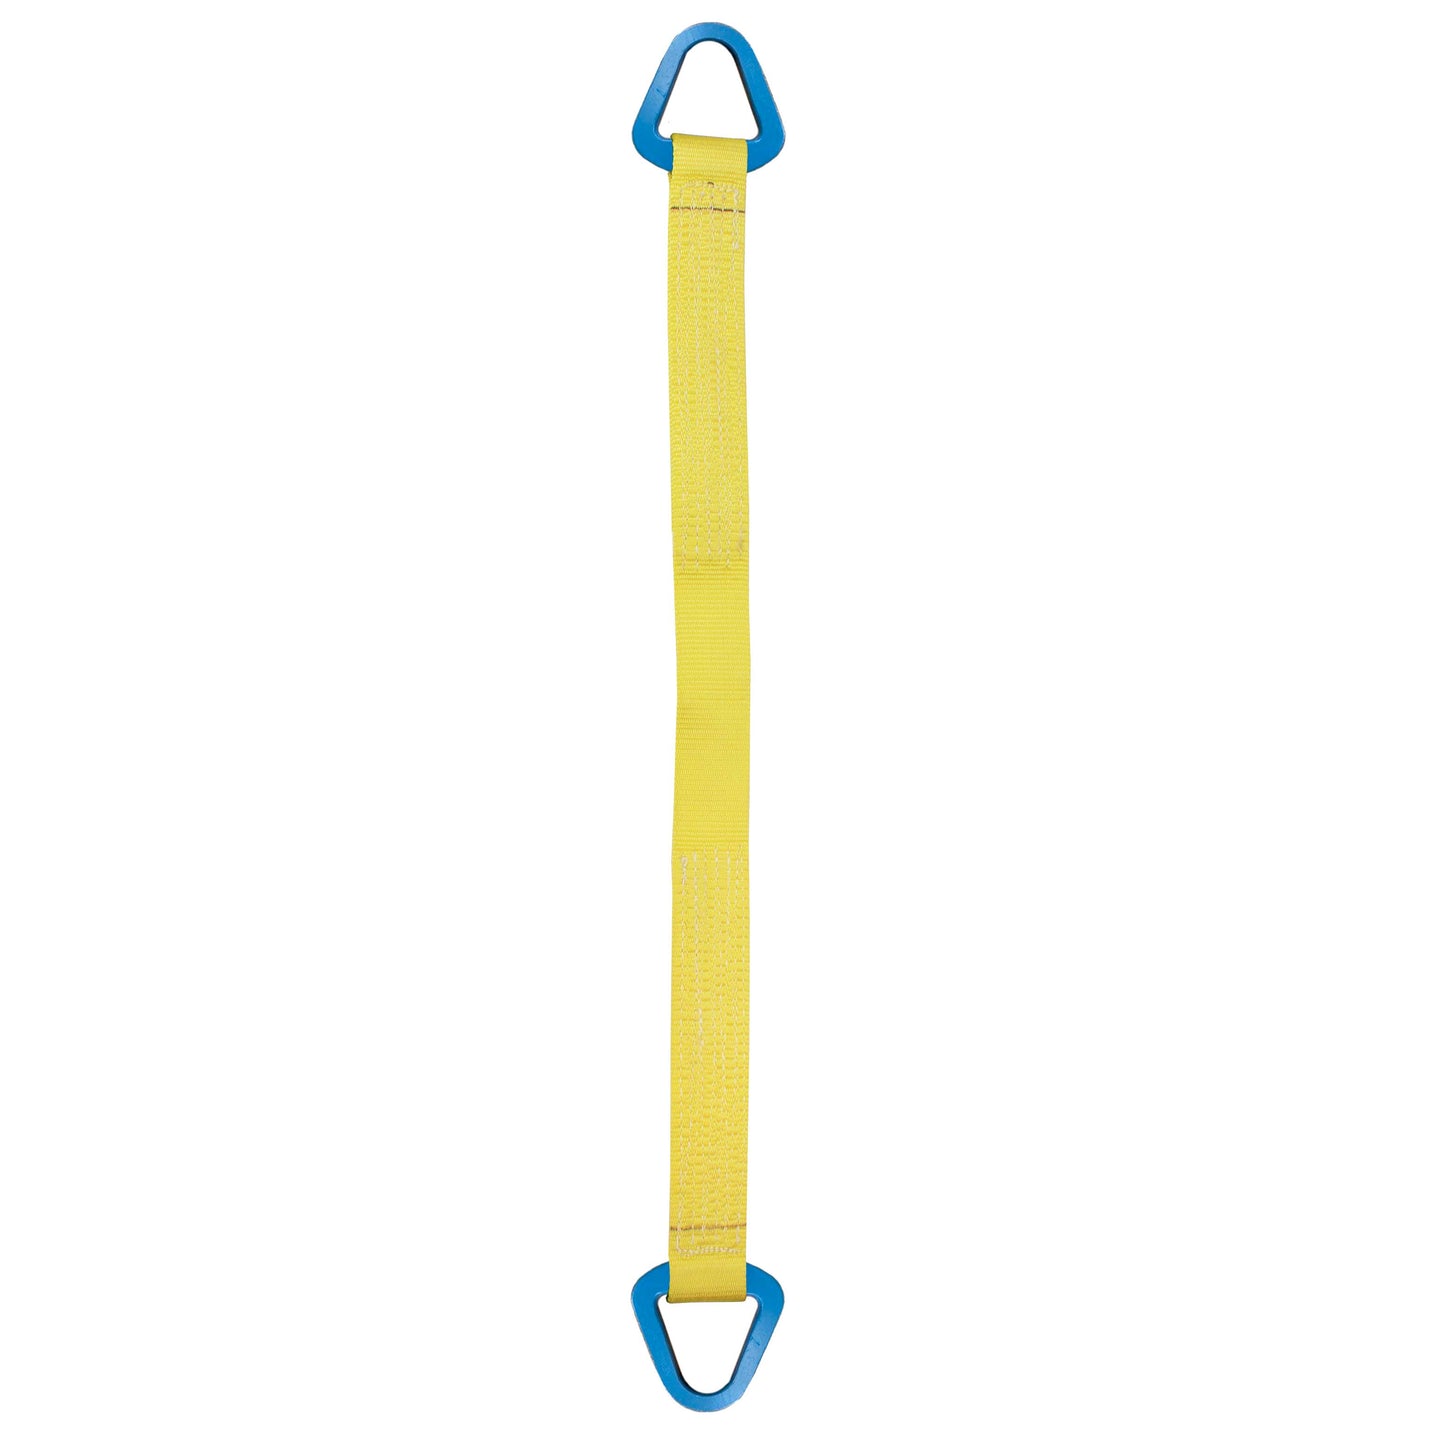 Nylon Lifting Sling Triangle 6 inch x 3 foot 2ply image 1 of 2